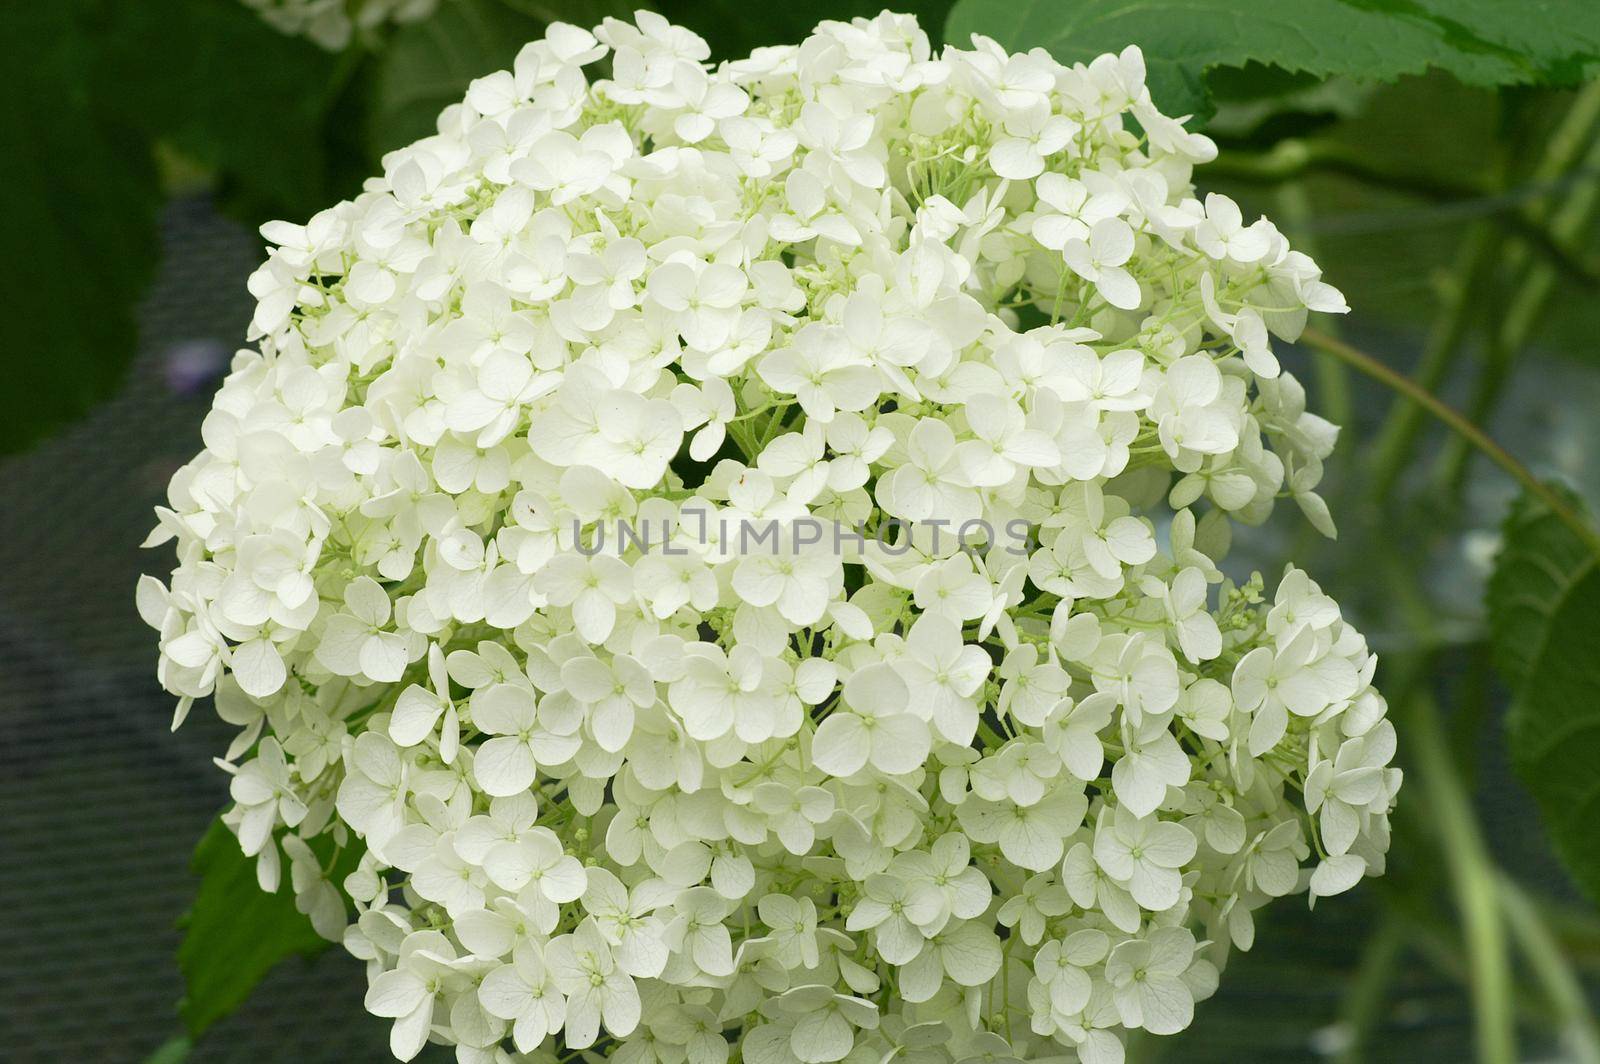 Hydrangea Annabelle. White hydrangea Annabelle blooming in garden, close up seen from above, with green leafs